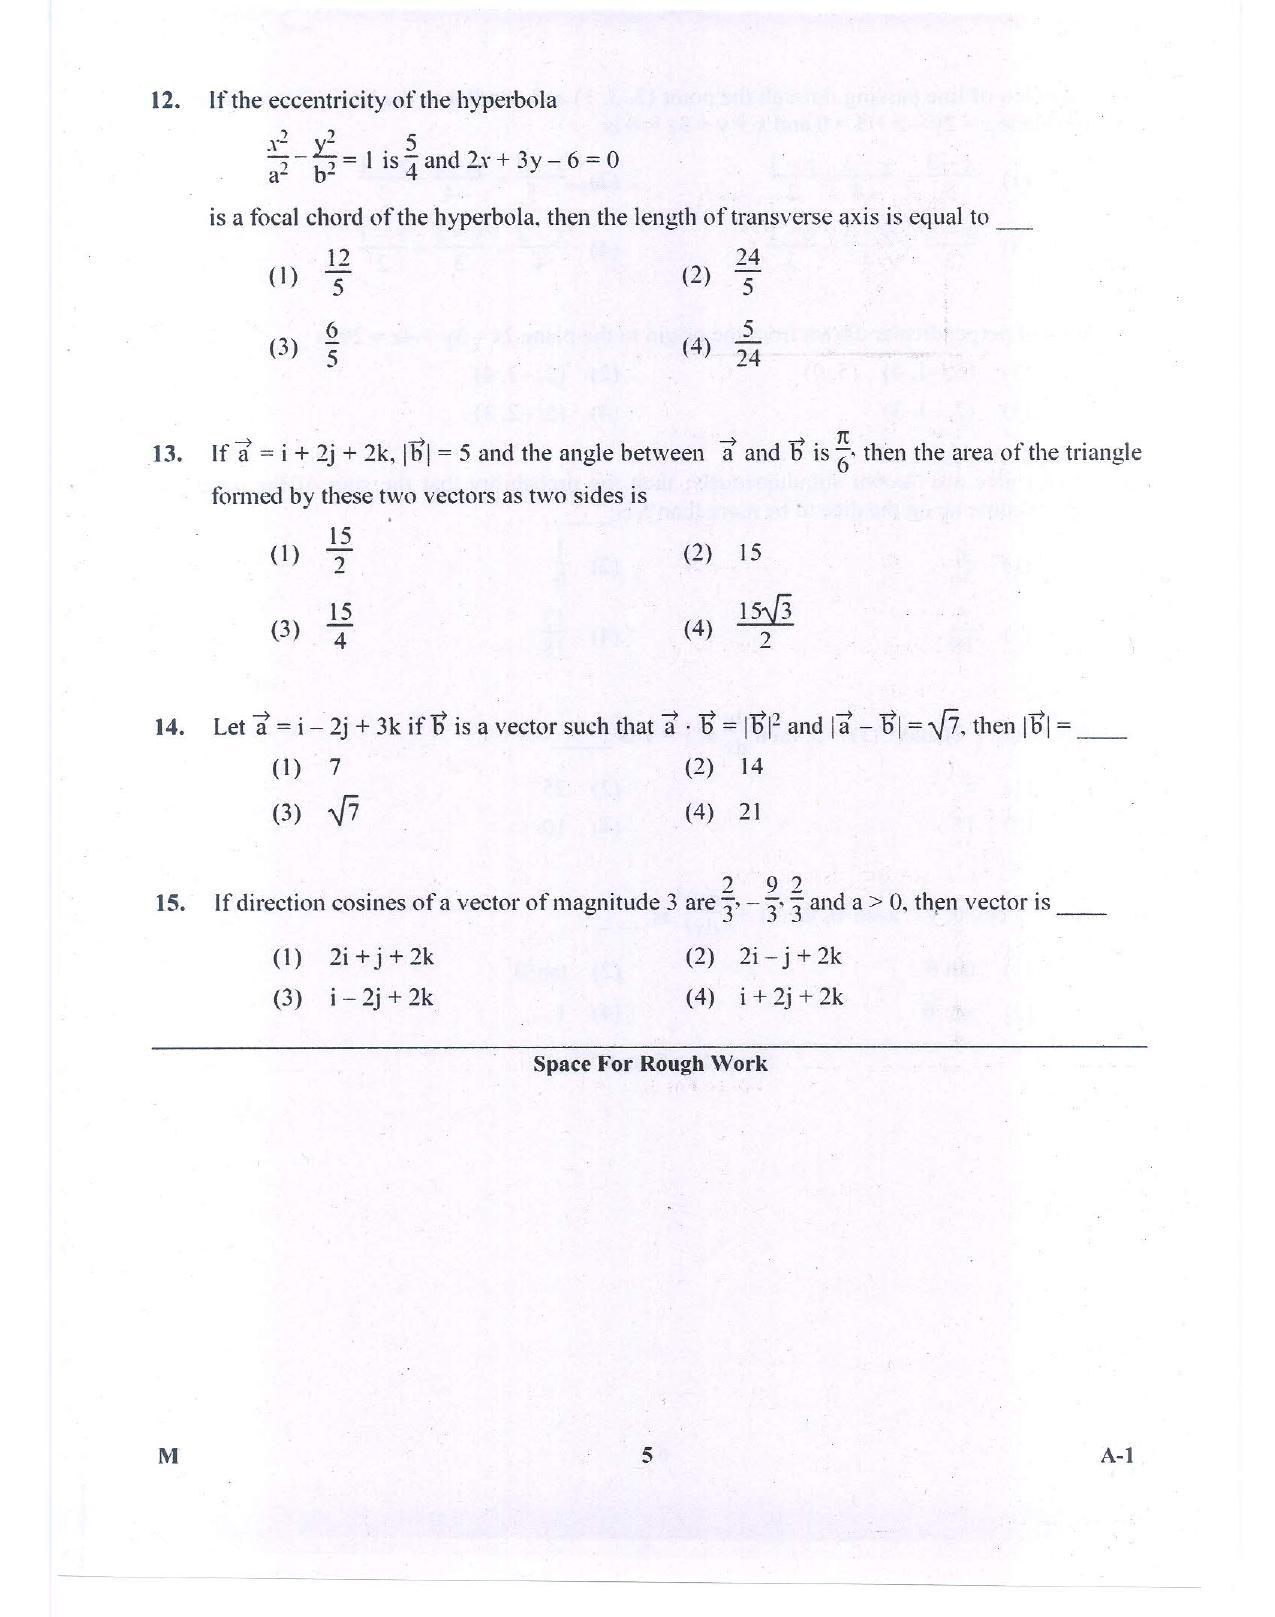 KCET Mathematics 2015 Question Papers - Page 5